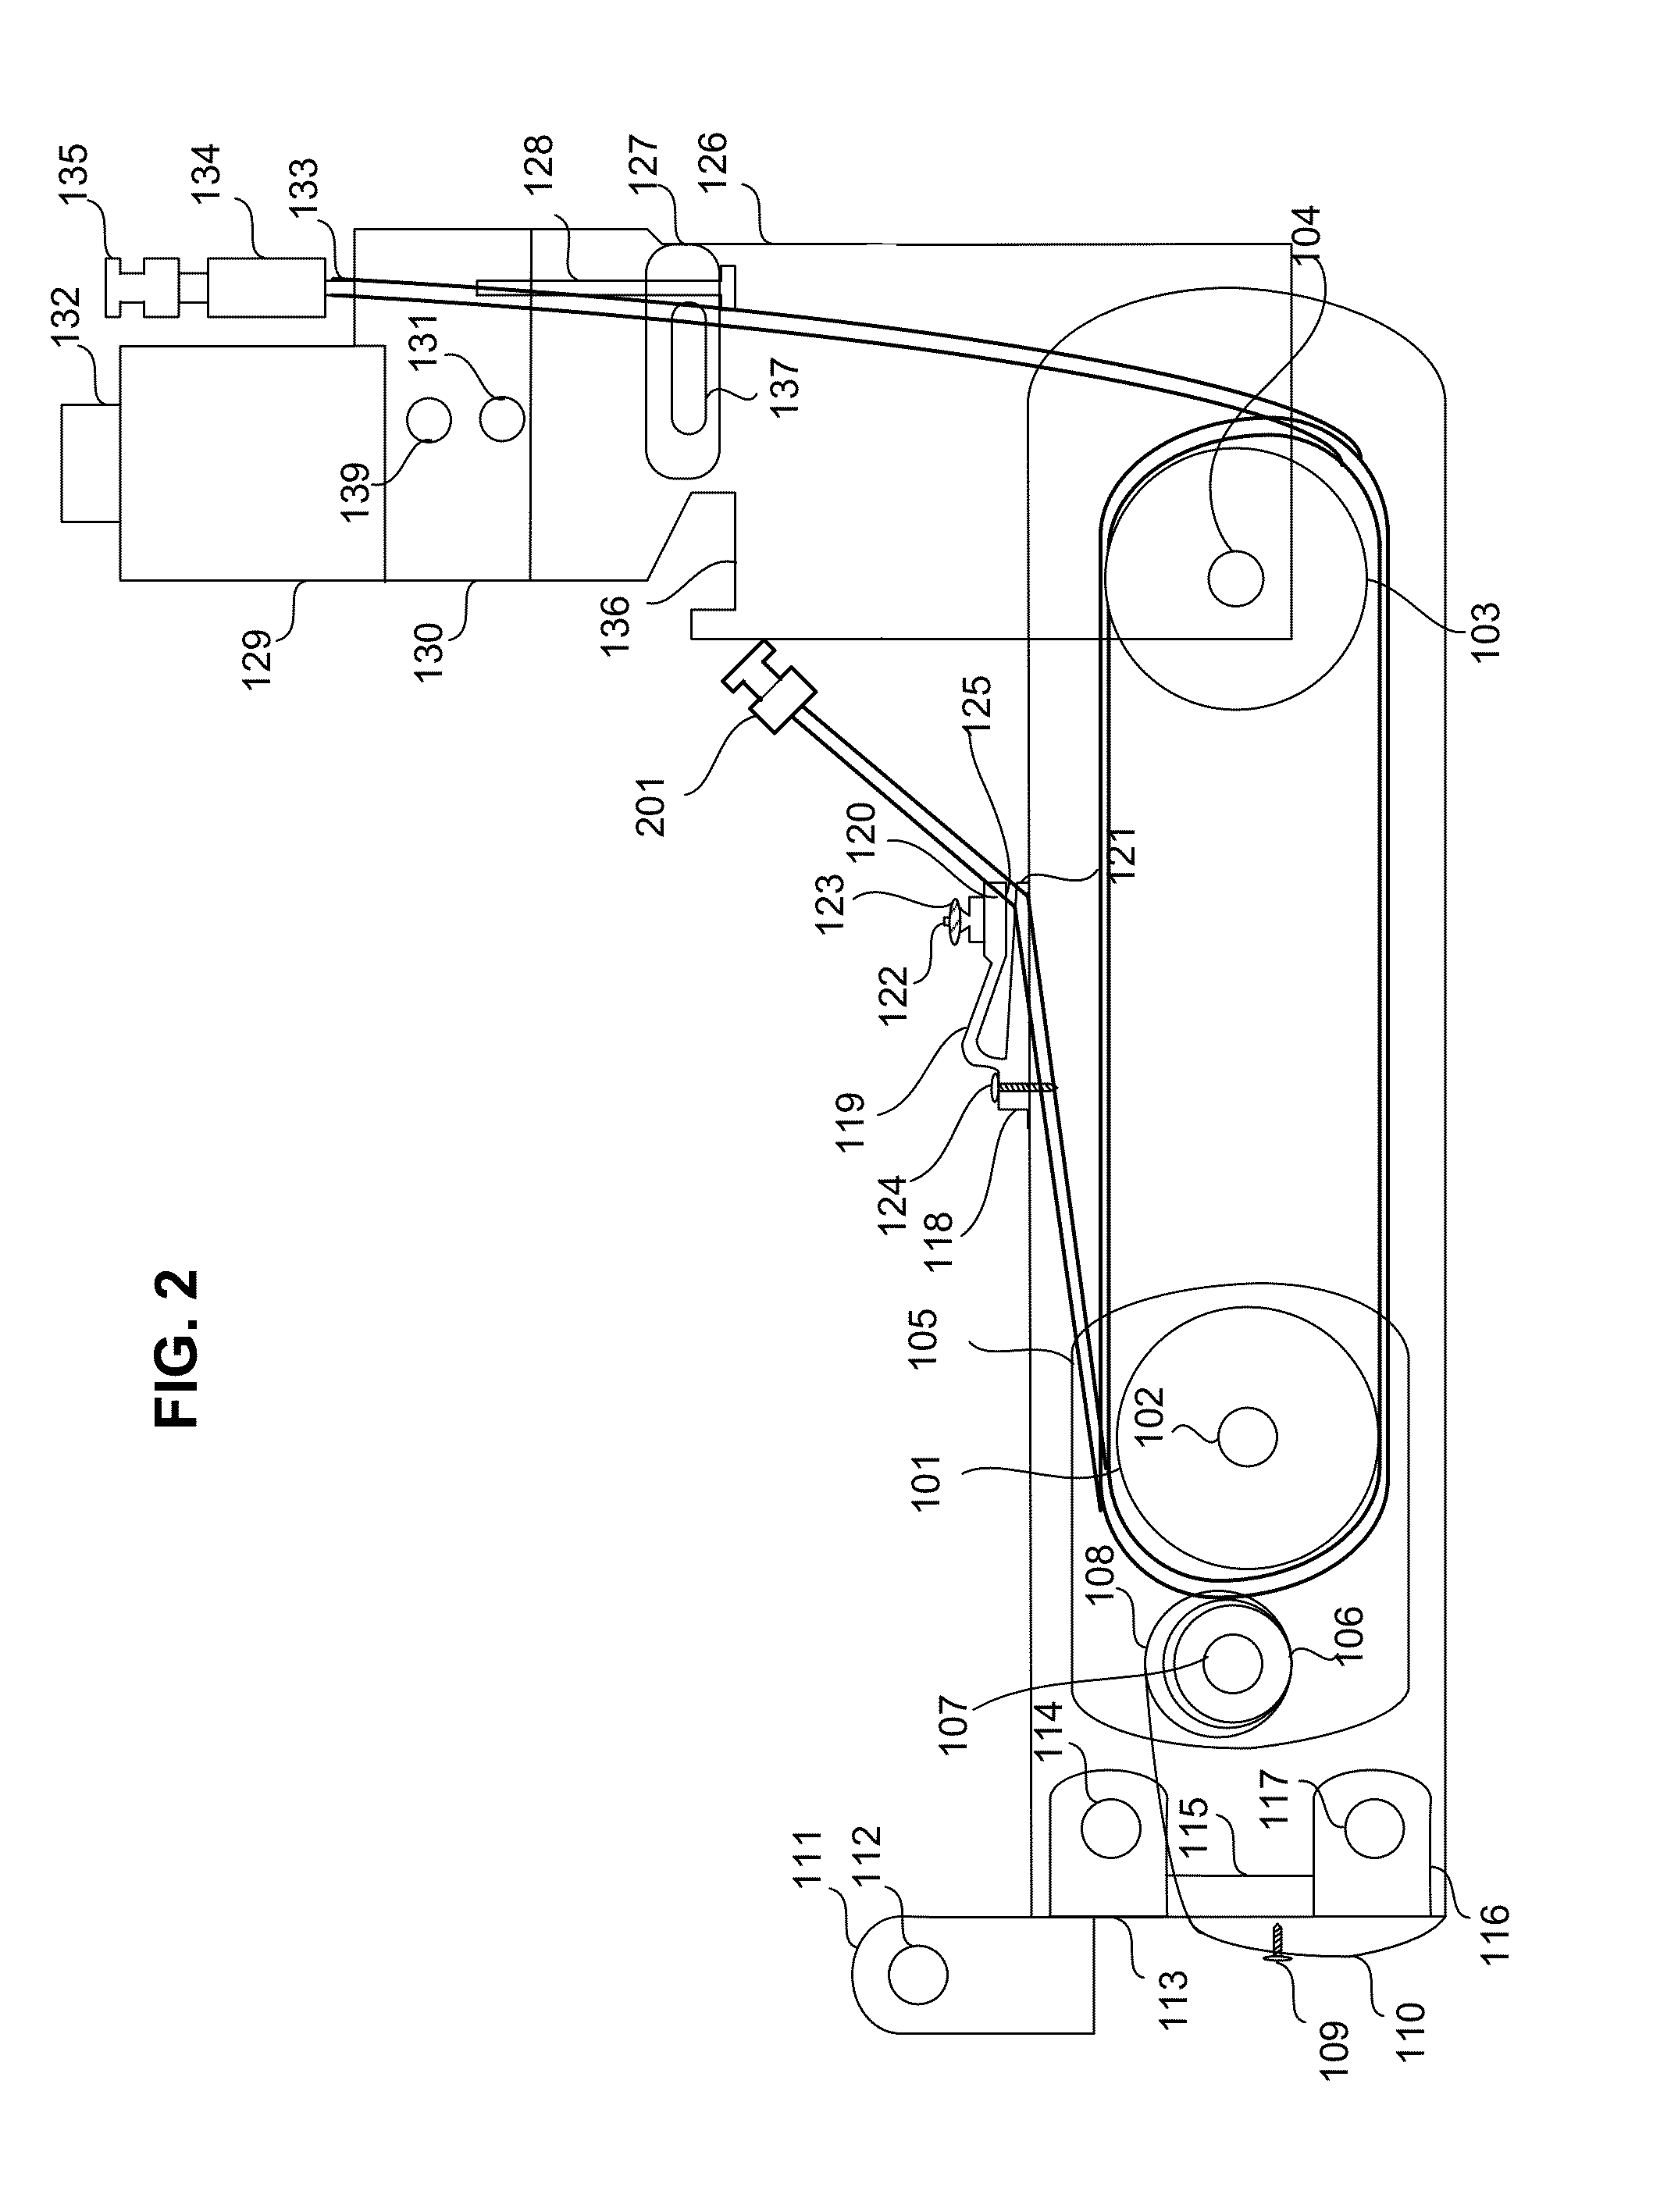 Speed control for cable retractor